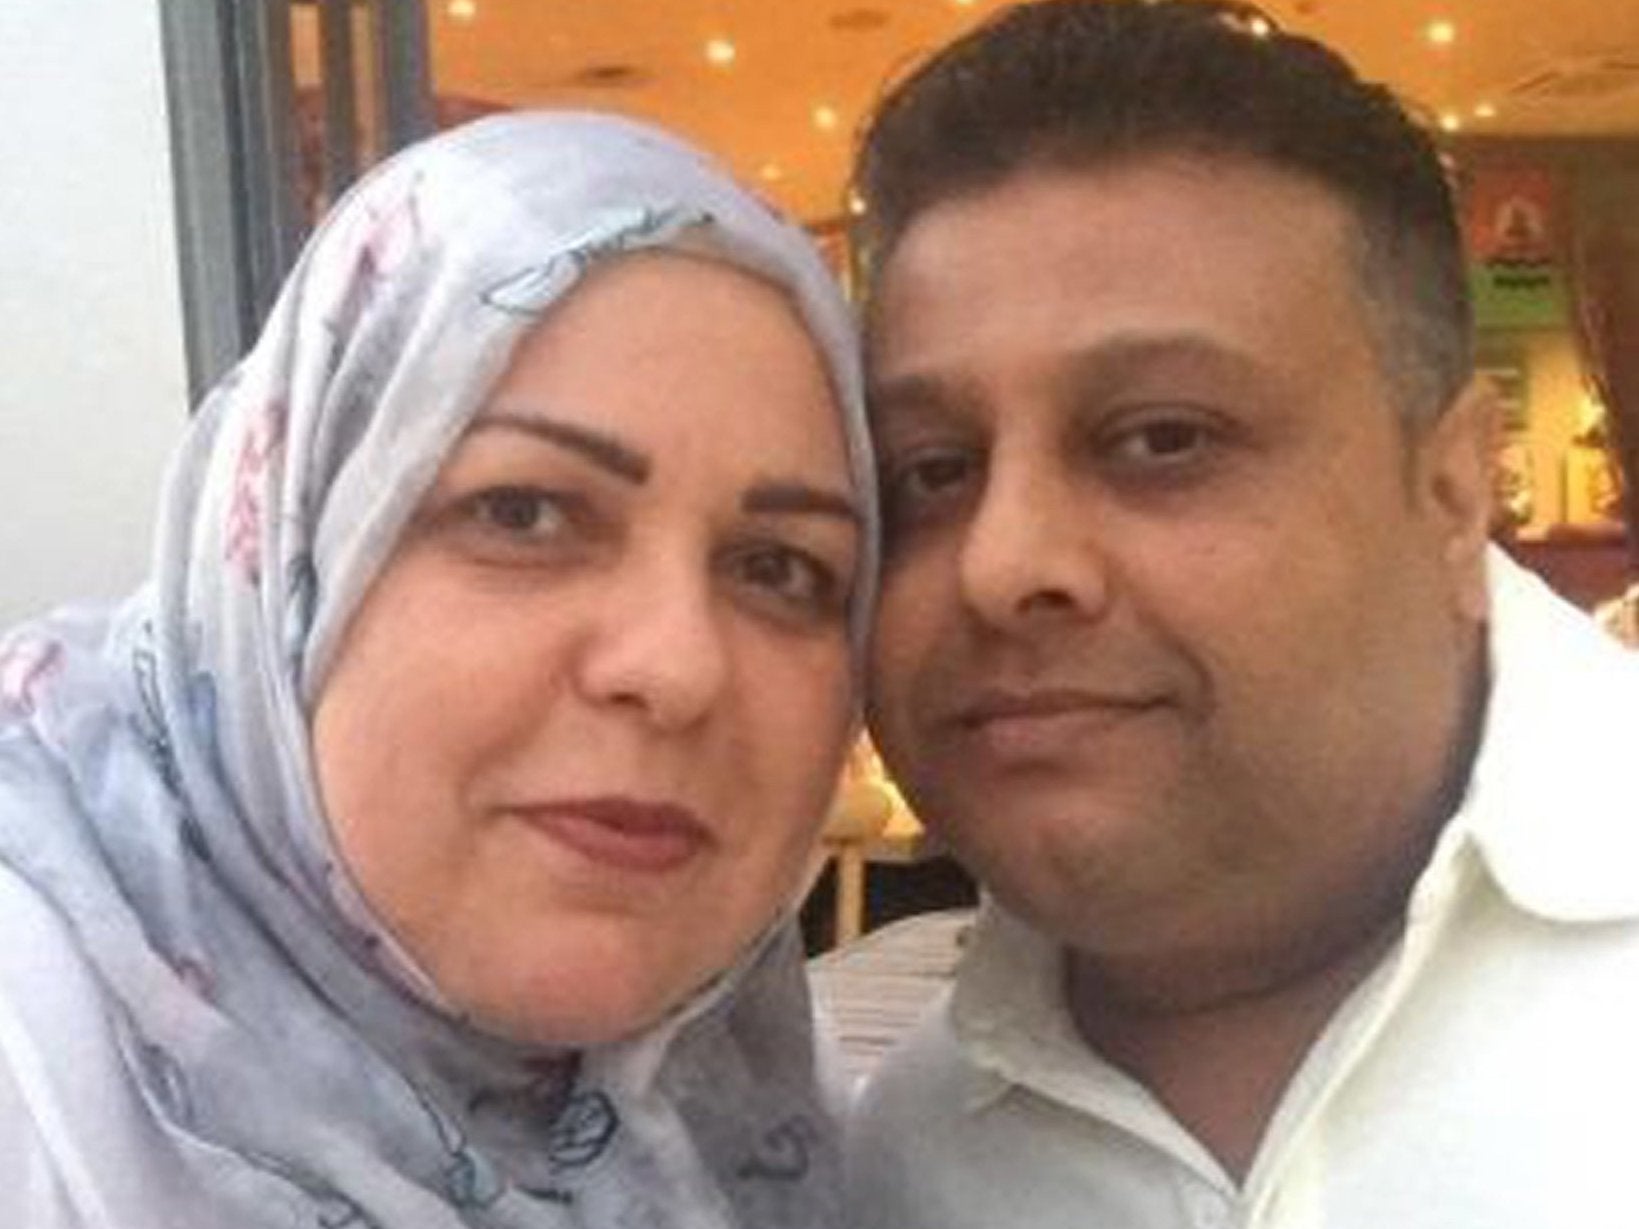 Khaola Saleem with her husband Mohamed. Janbaz Tarin has admitted murdering Mrs Saleem and her daughter Raneem Oudeh in a frenzied knife attack